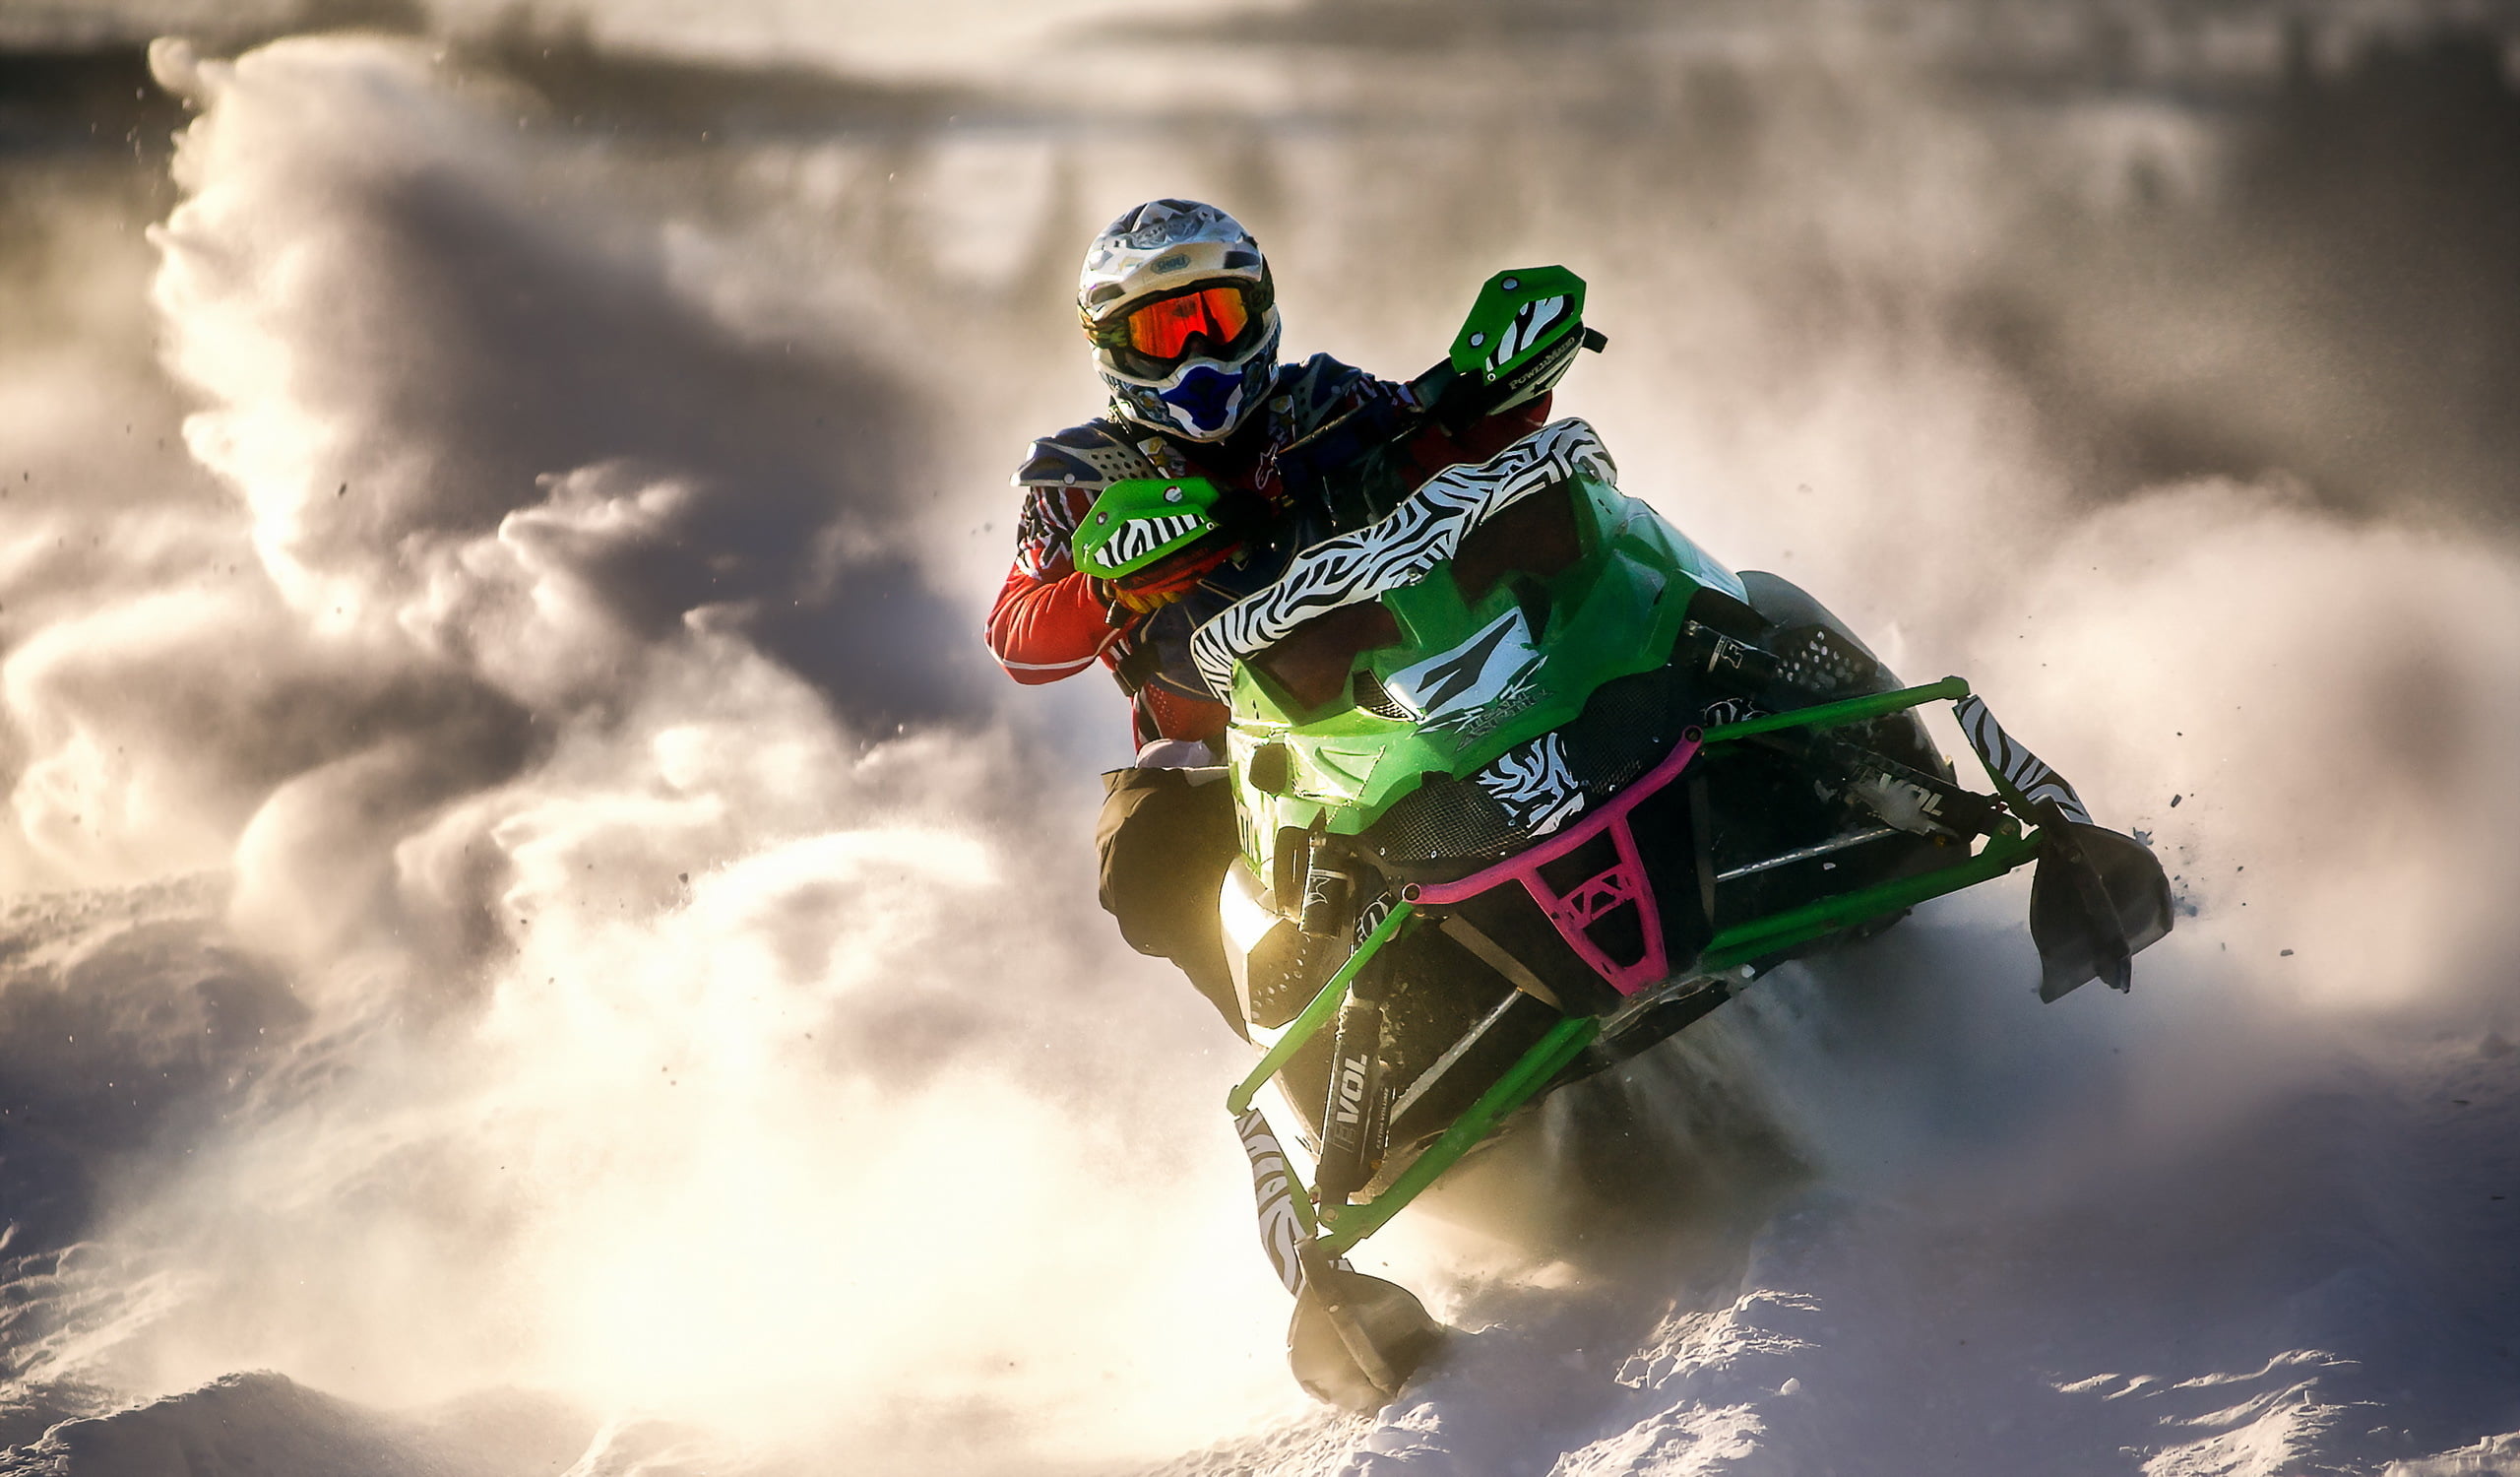 green and black snowmobile, sports, racing, winter, extreme Sports